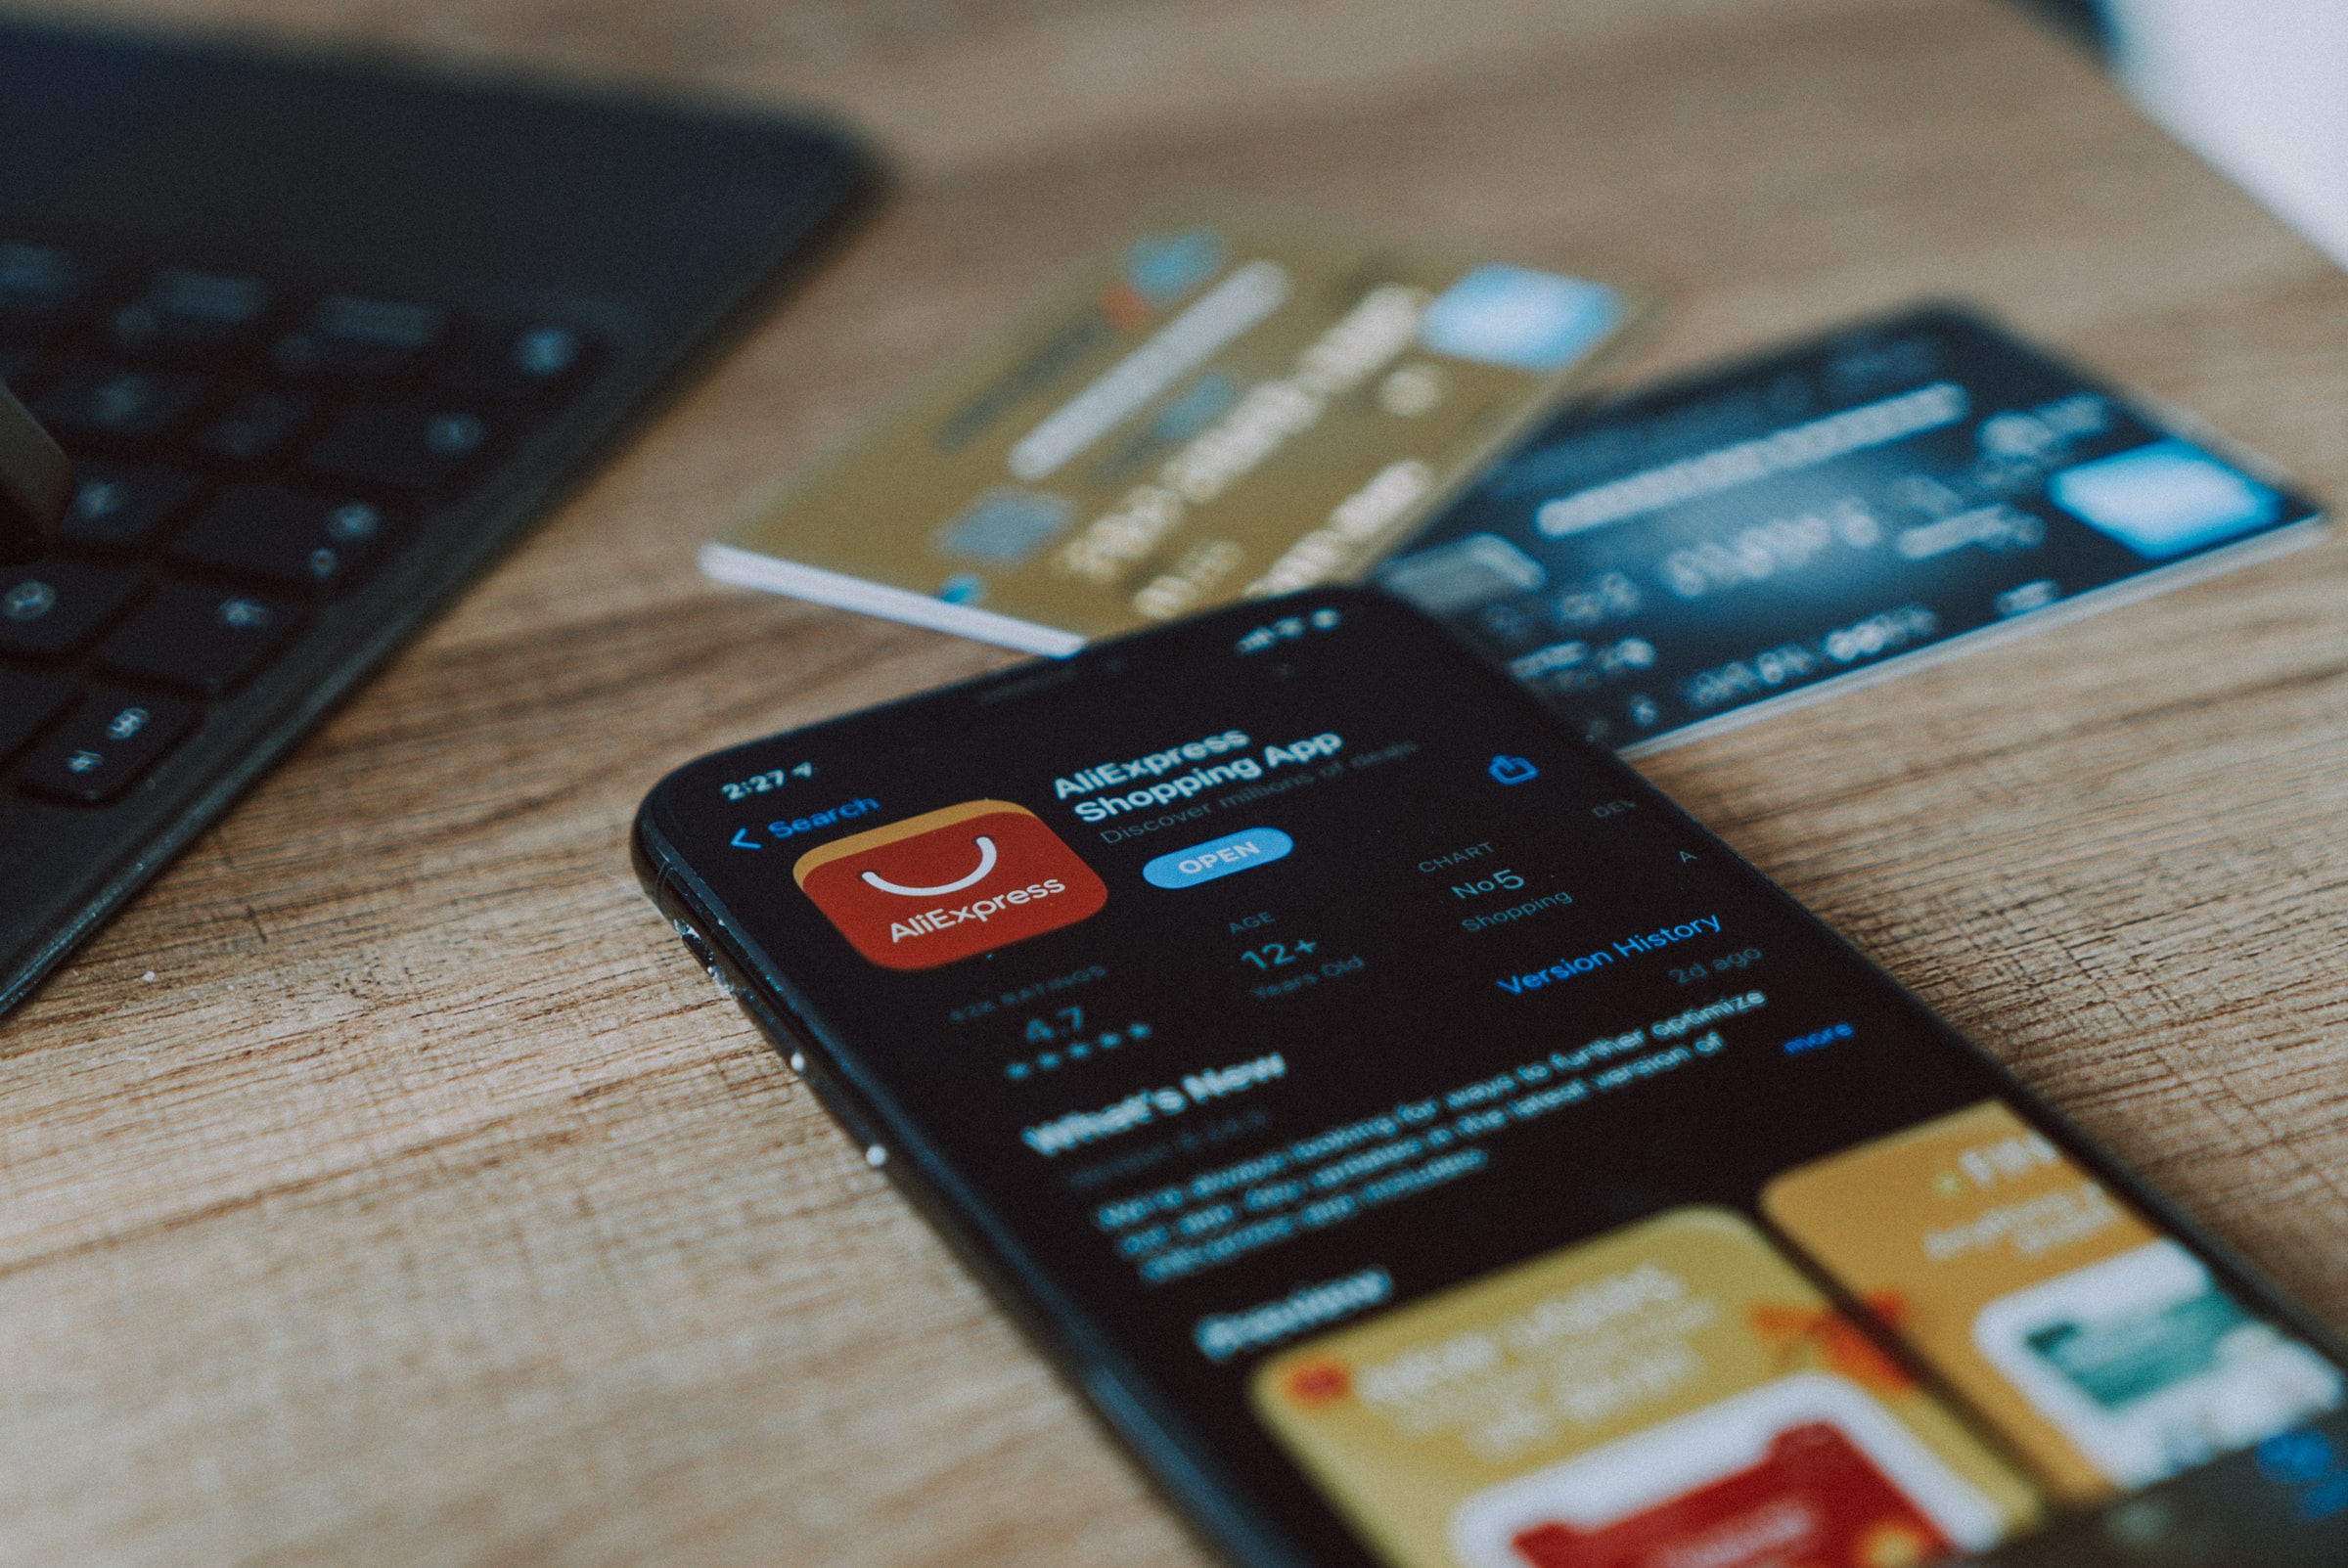 Credit cards and phone pay